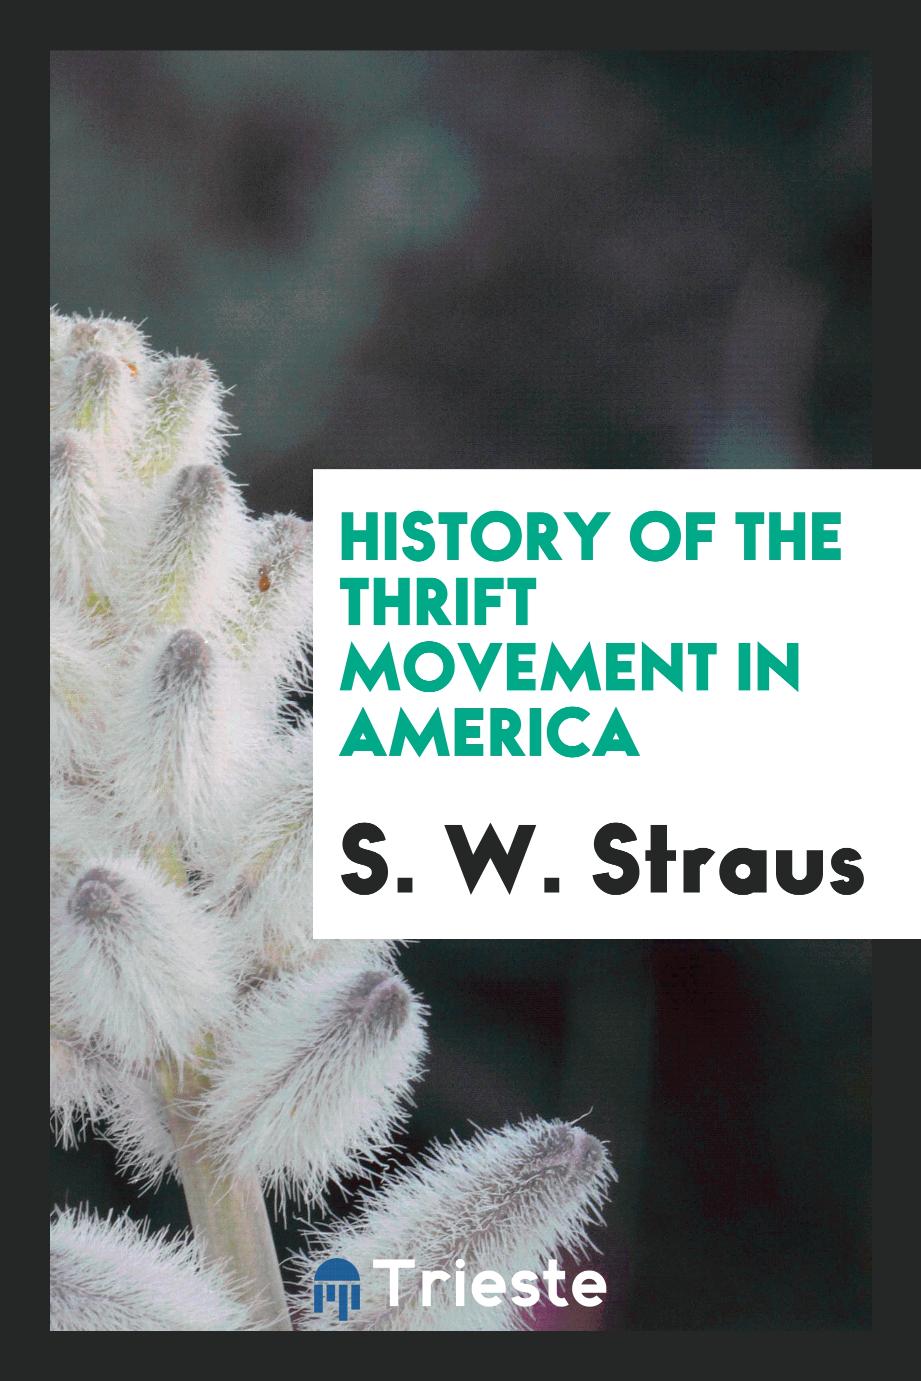 History of the thrift movement in America